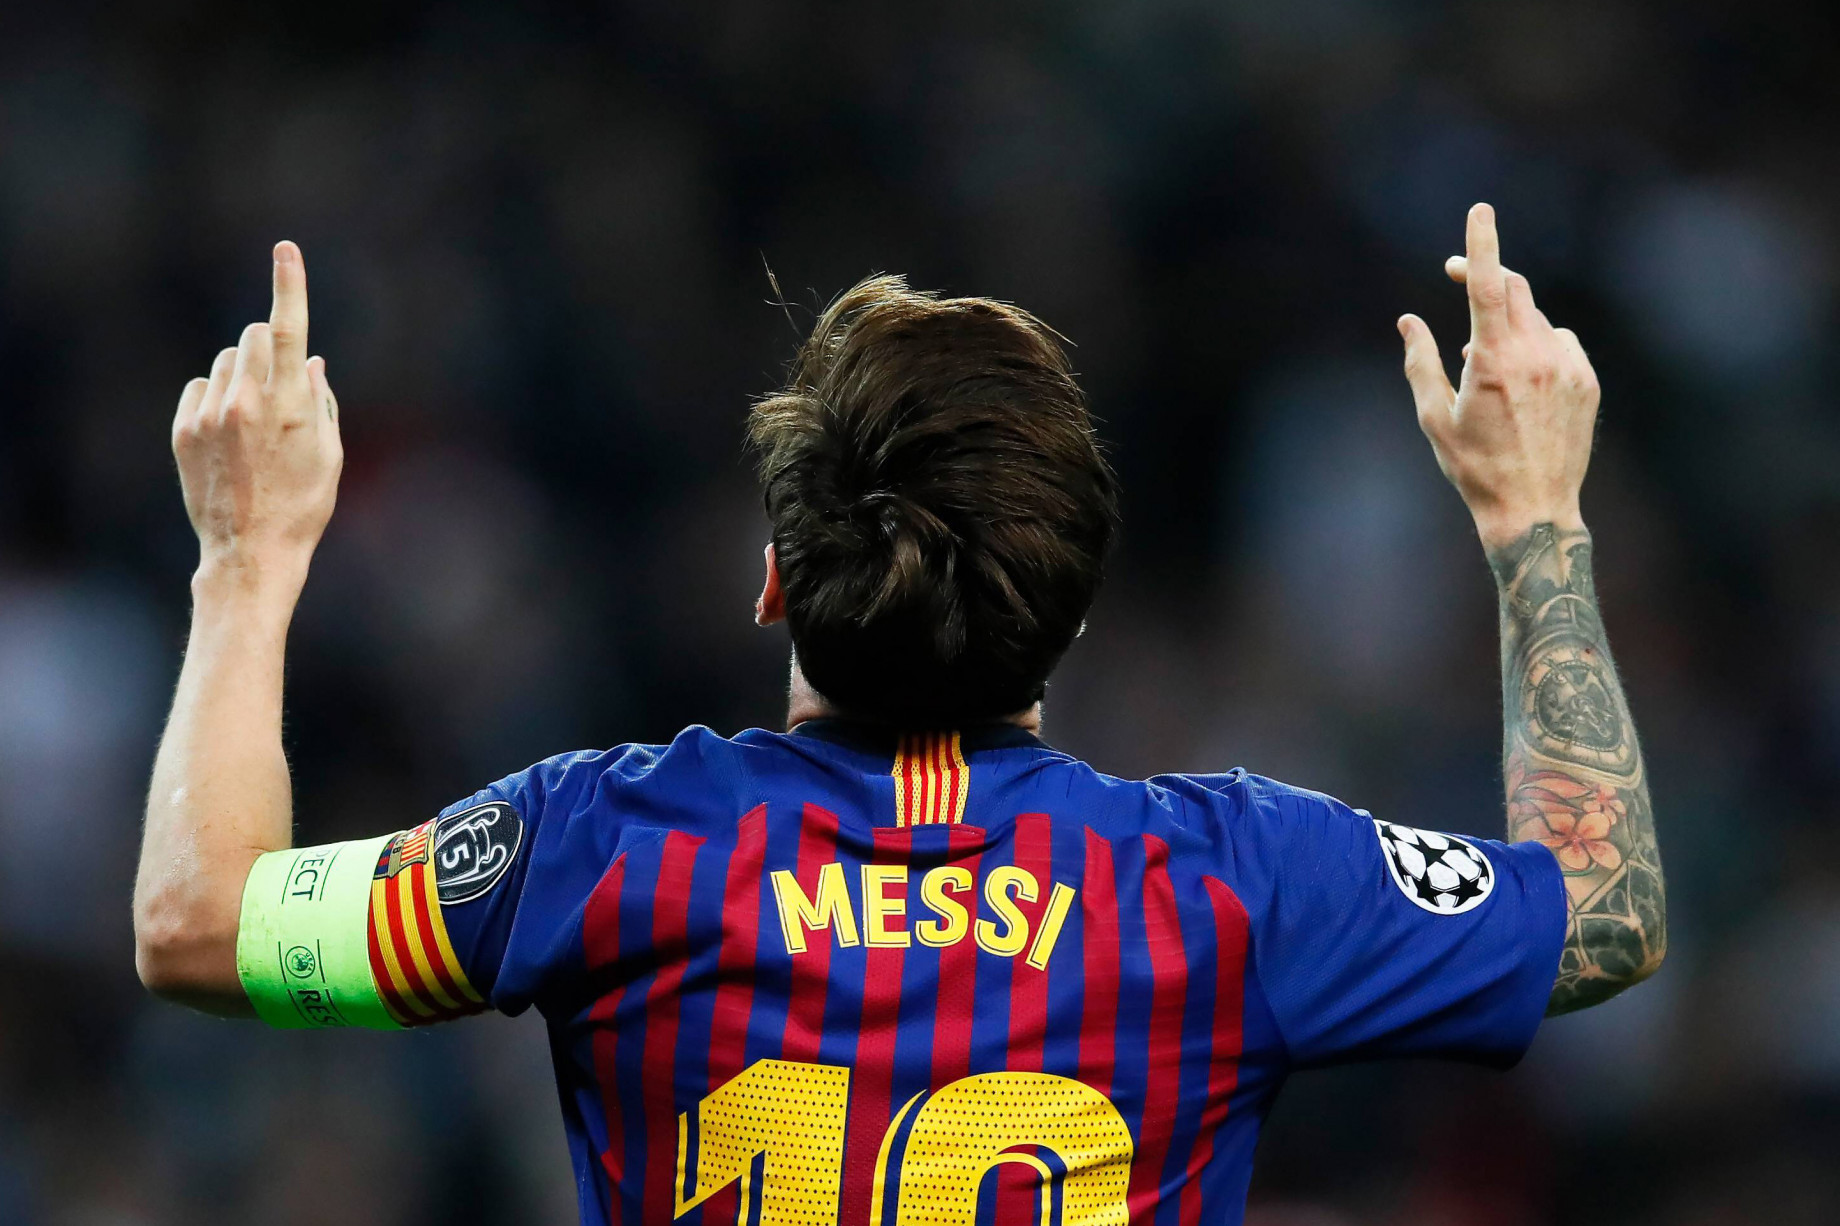 messi_barcellona_gallery_image.jpg